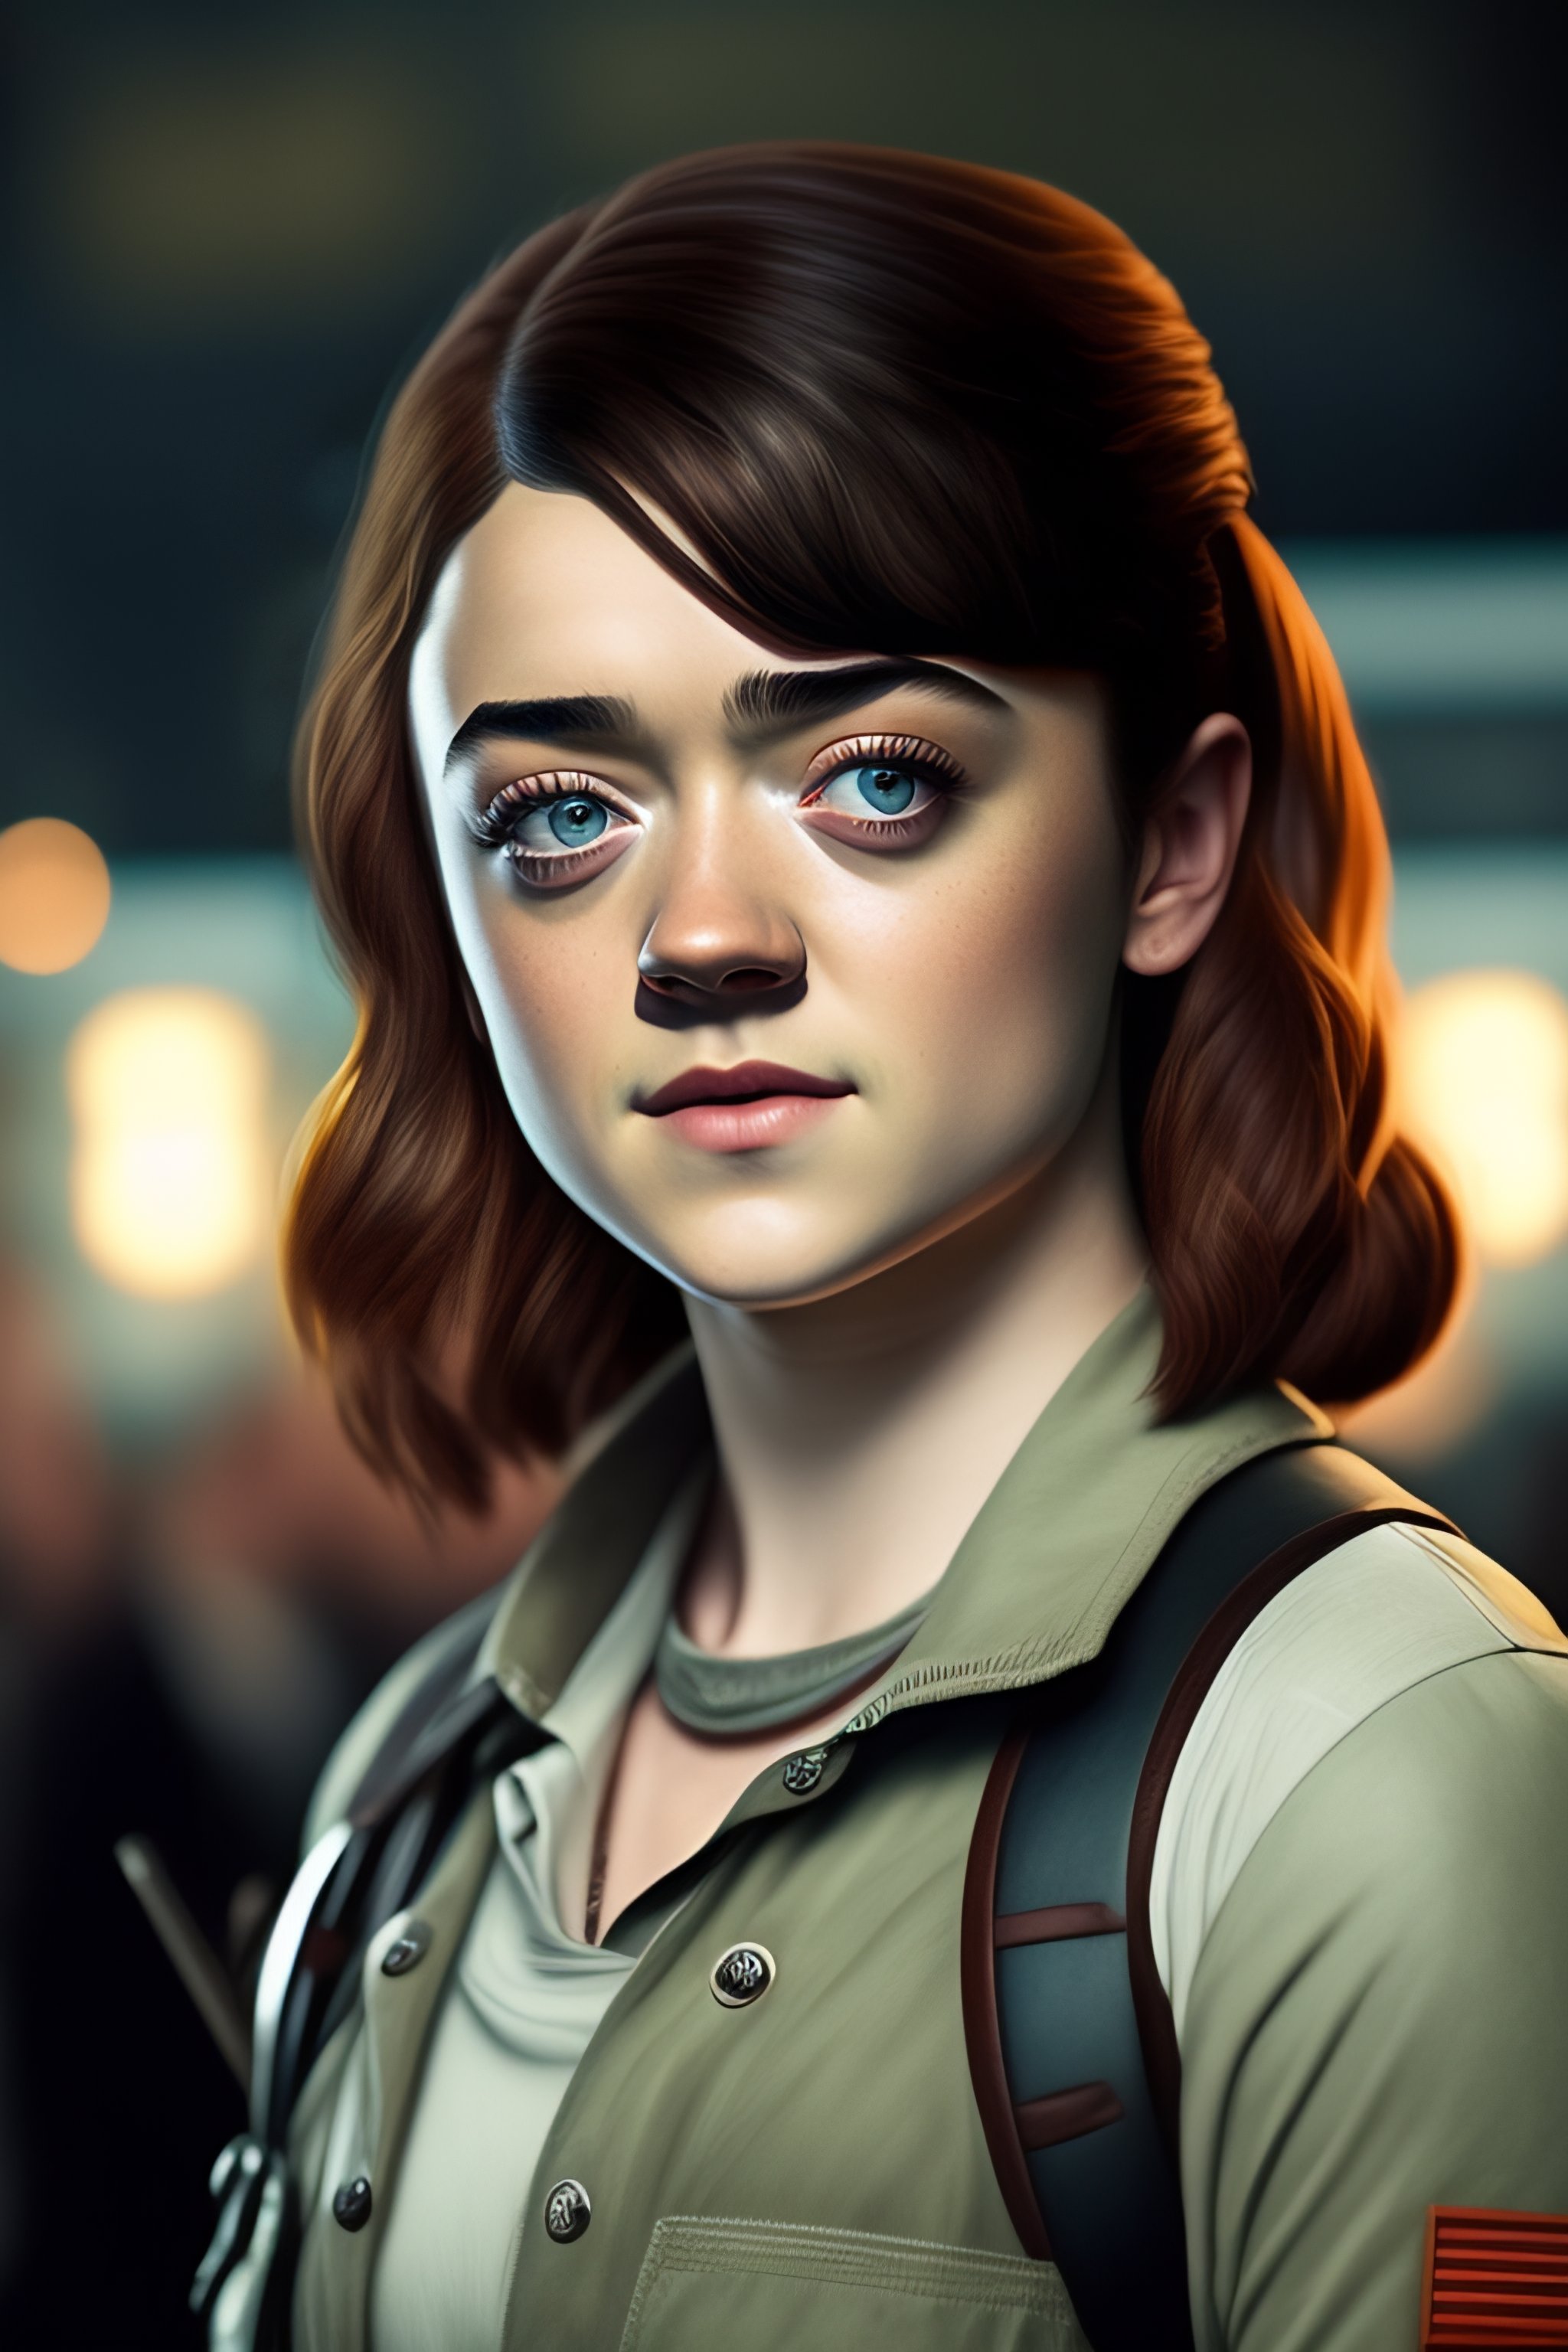 Lexica - Maisie Williams, as ellie from the last of us